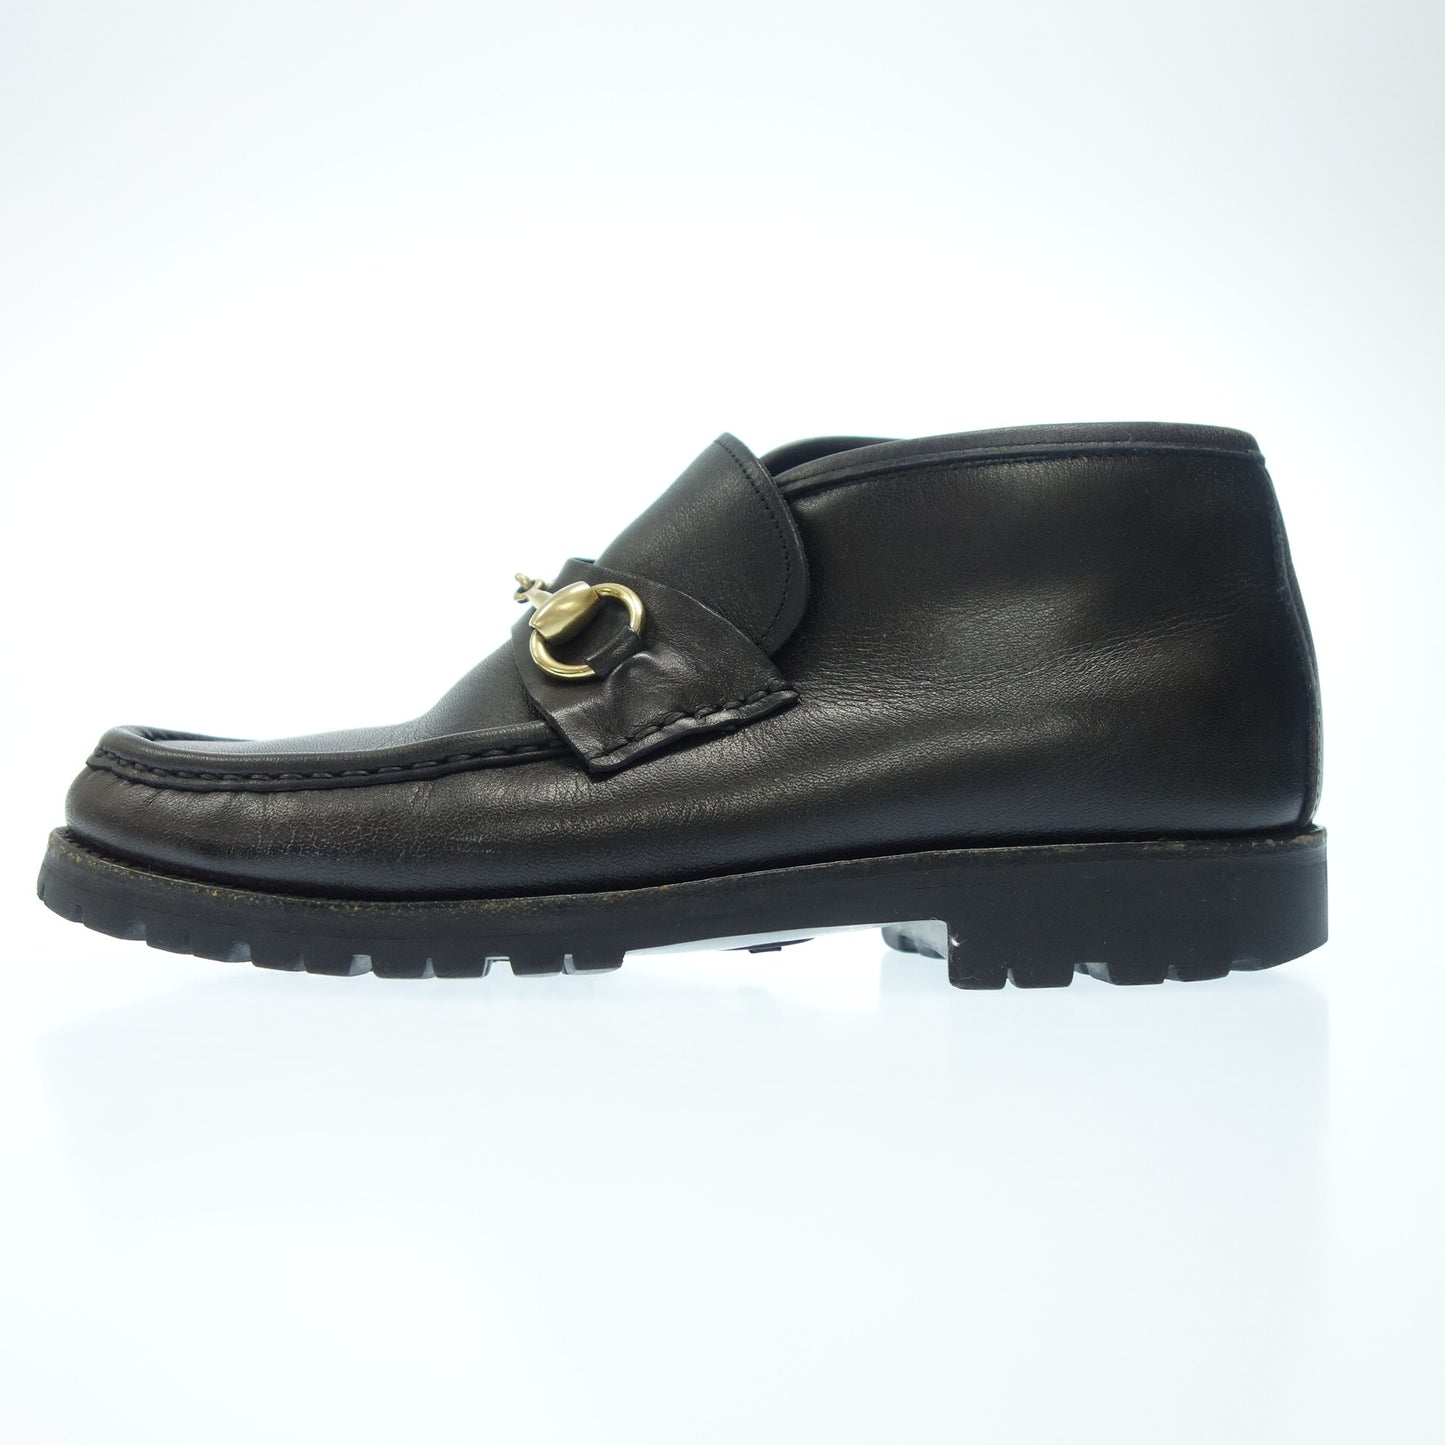 Used ◆ Gucci Leather Short Boots Horsebit Women's 36.5 Black GUCCI [AFC41] 